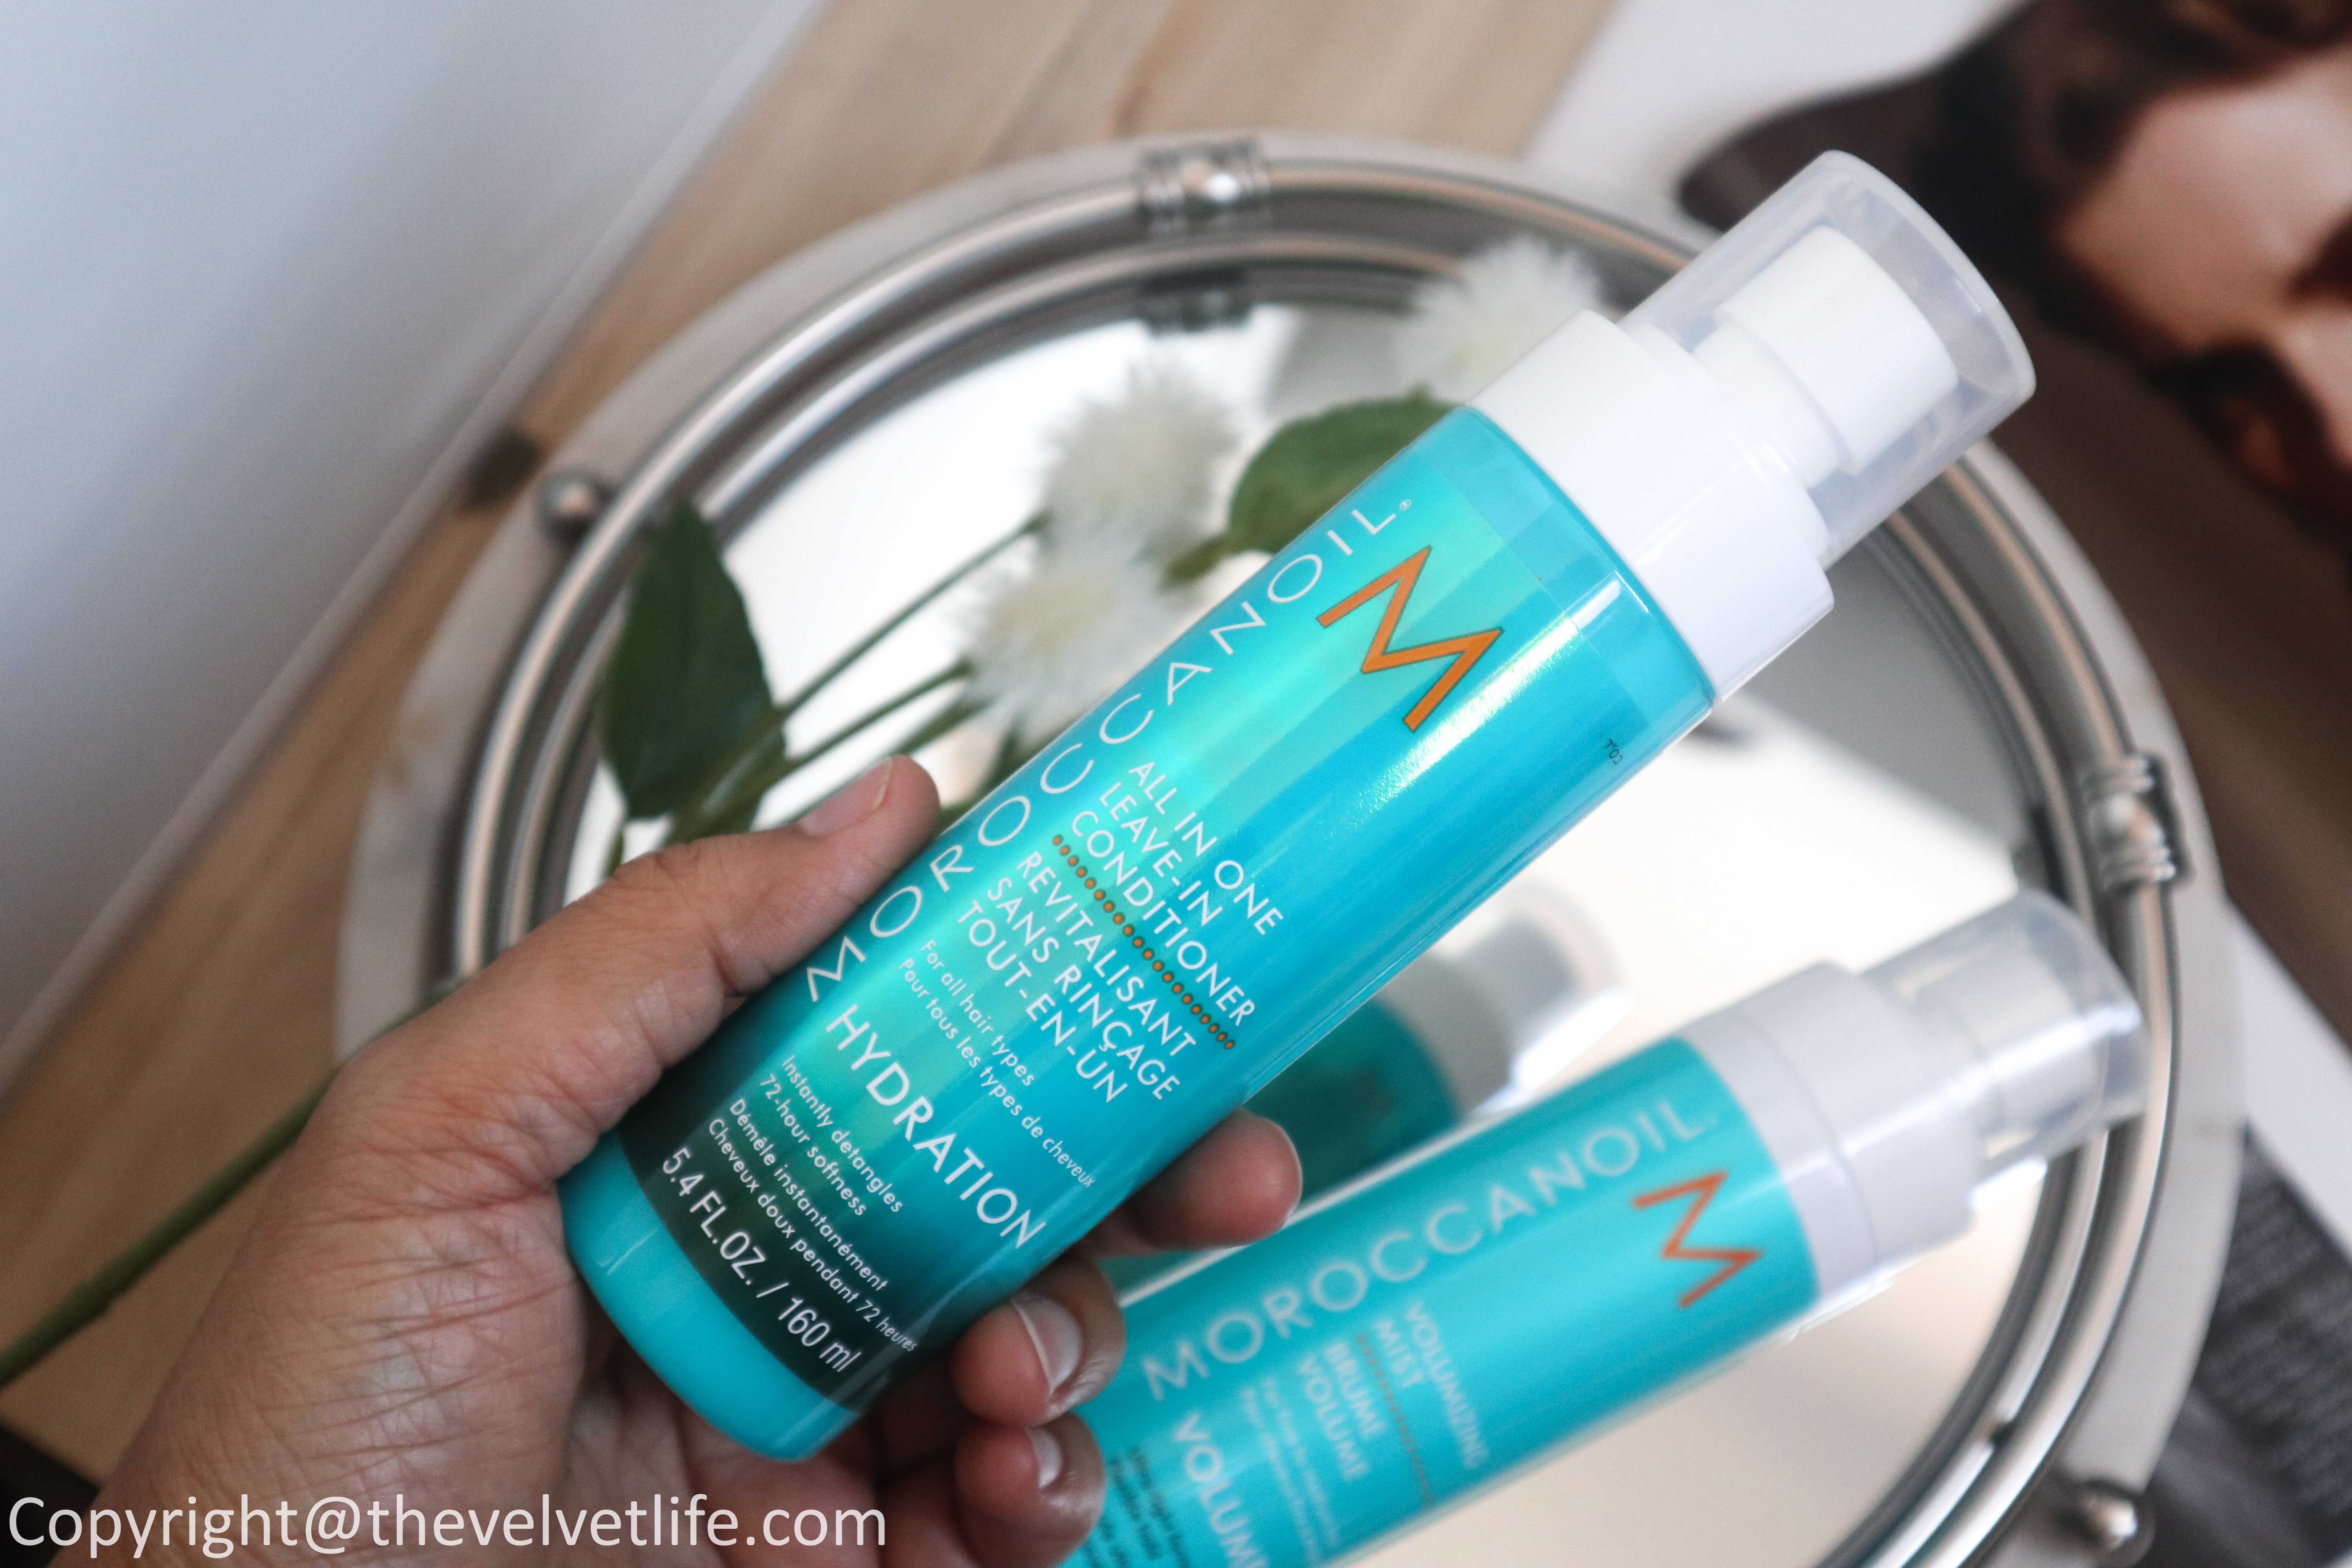 New MoroccanOil All In One Leave-In Conditioner and MoroccanOil Volumizing Mist review